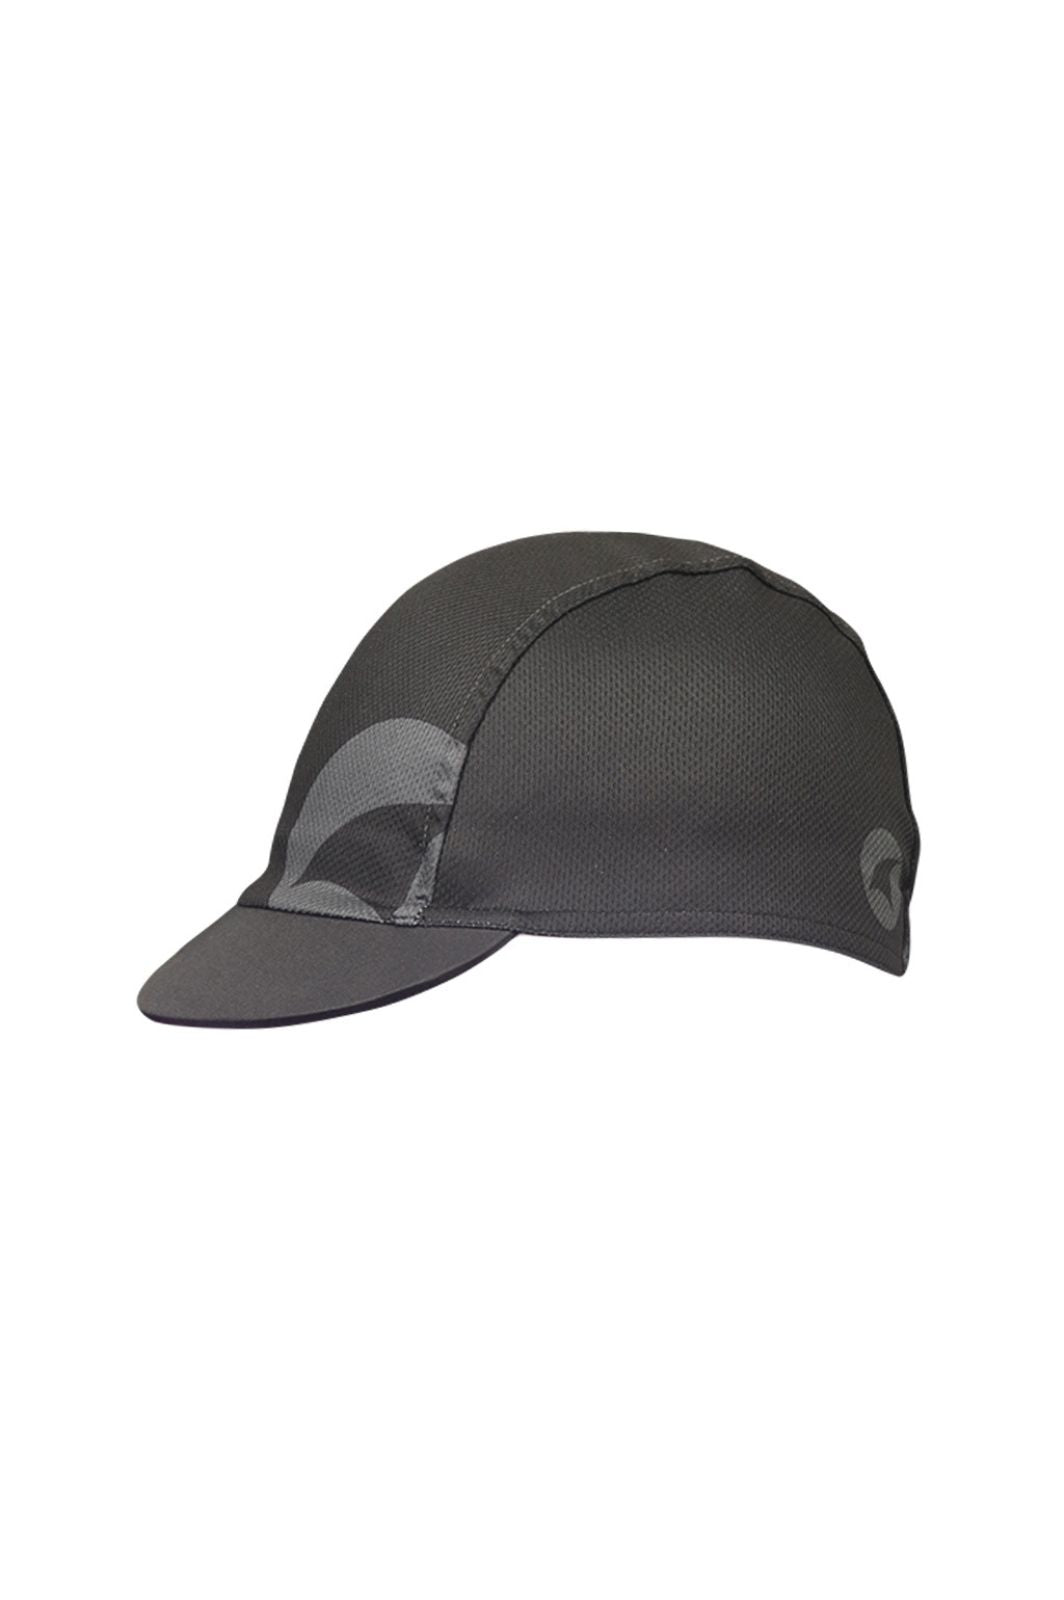 Charcoal Cycling Cap - Left View